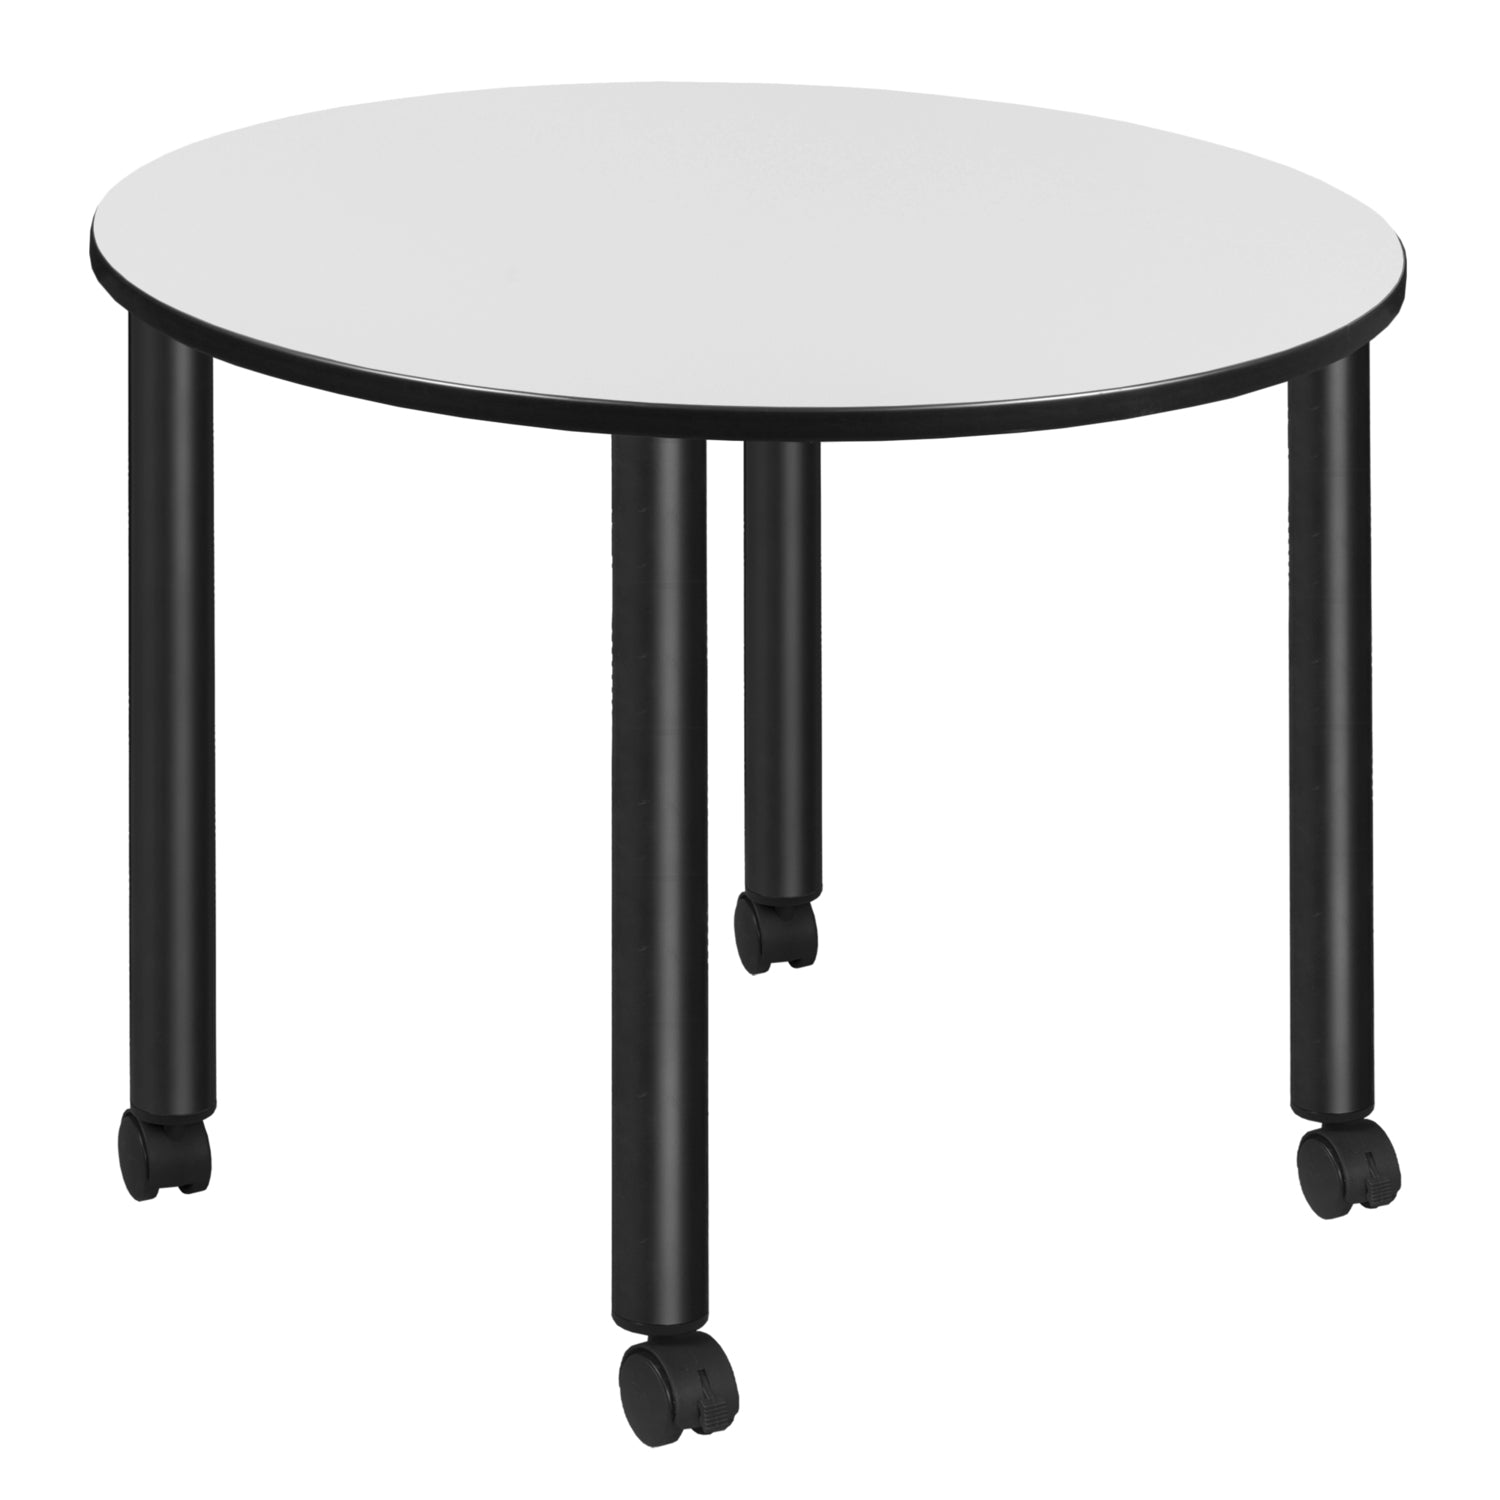 Kee 48" Round Mobile Breakroom Table